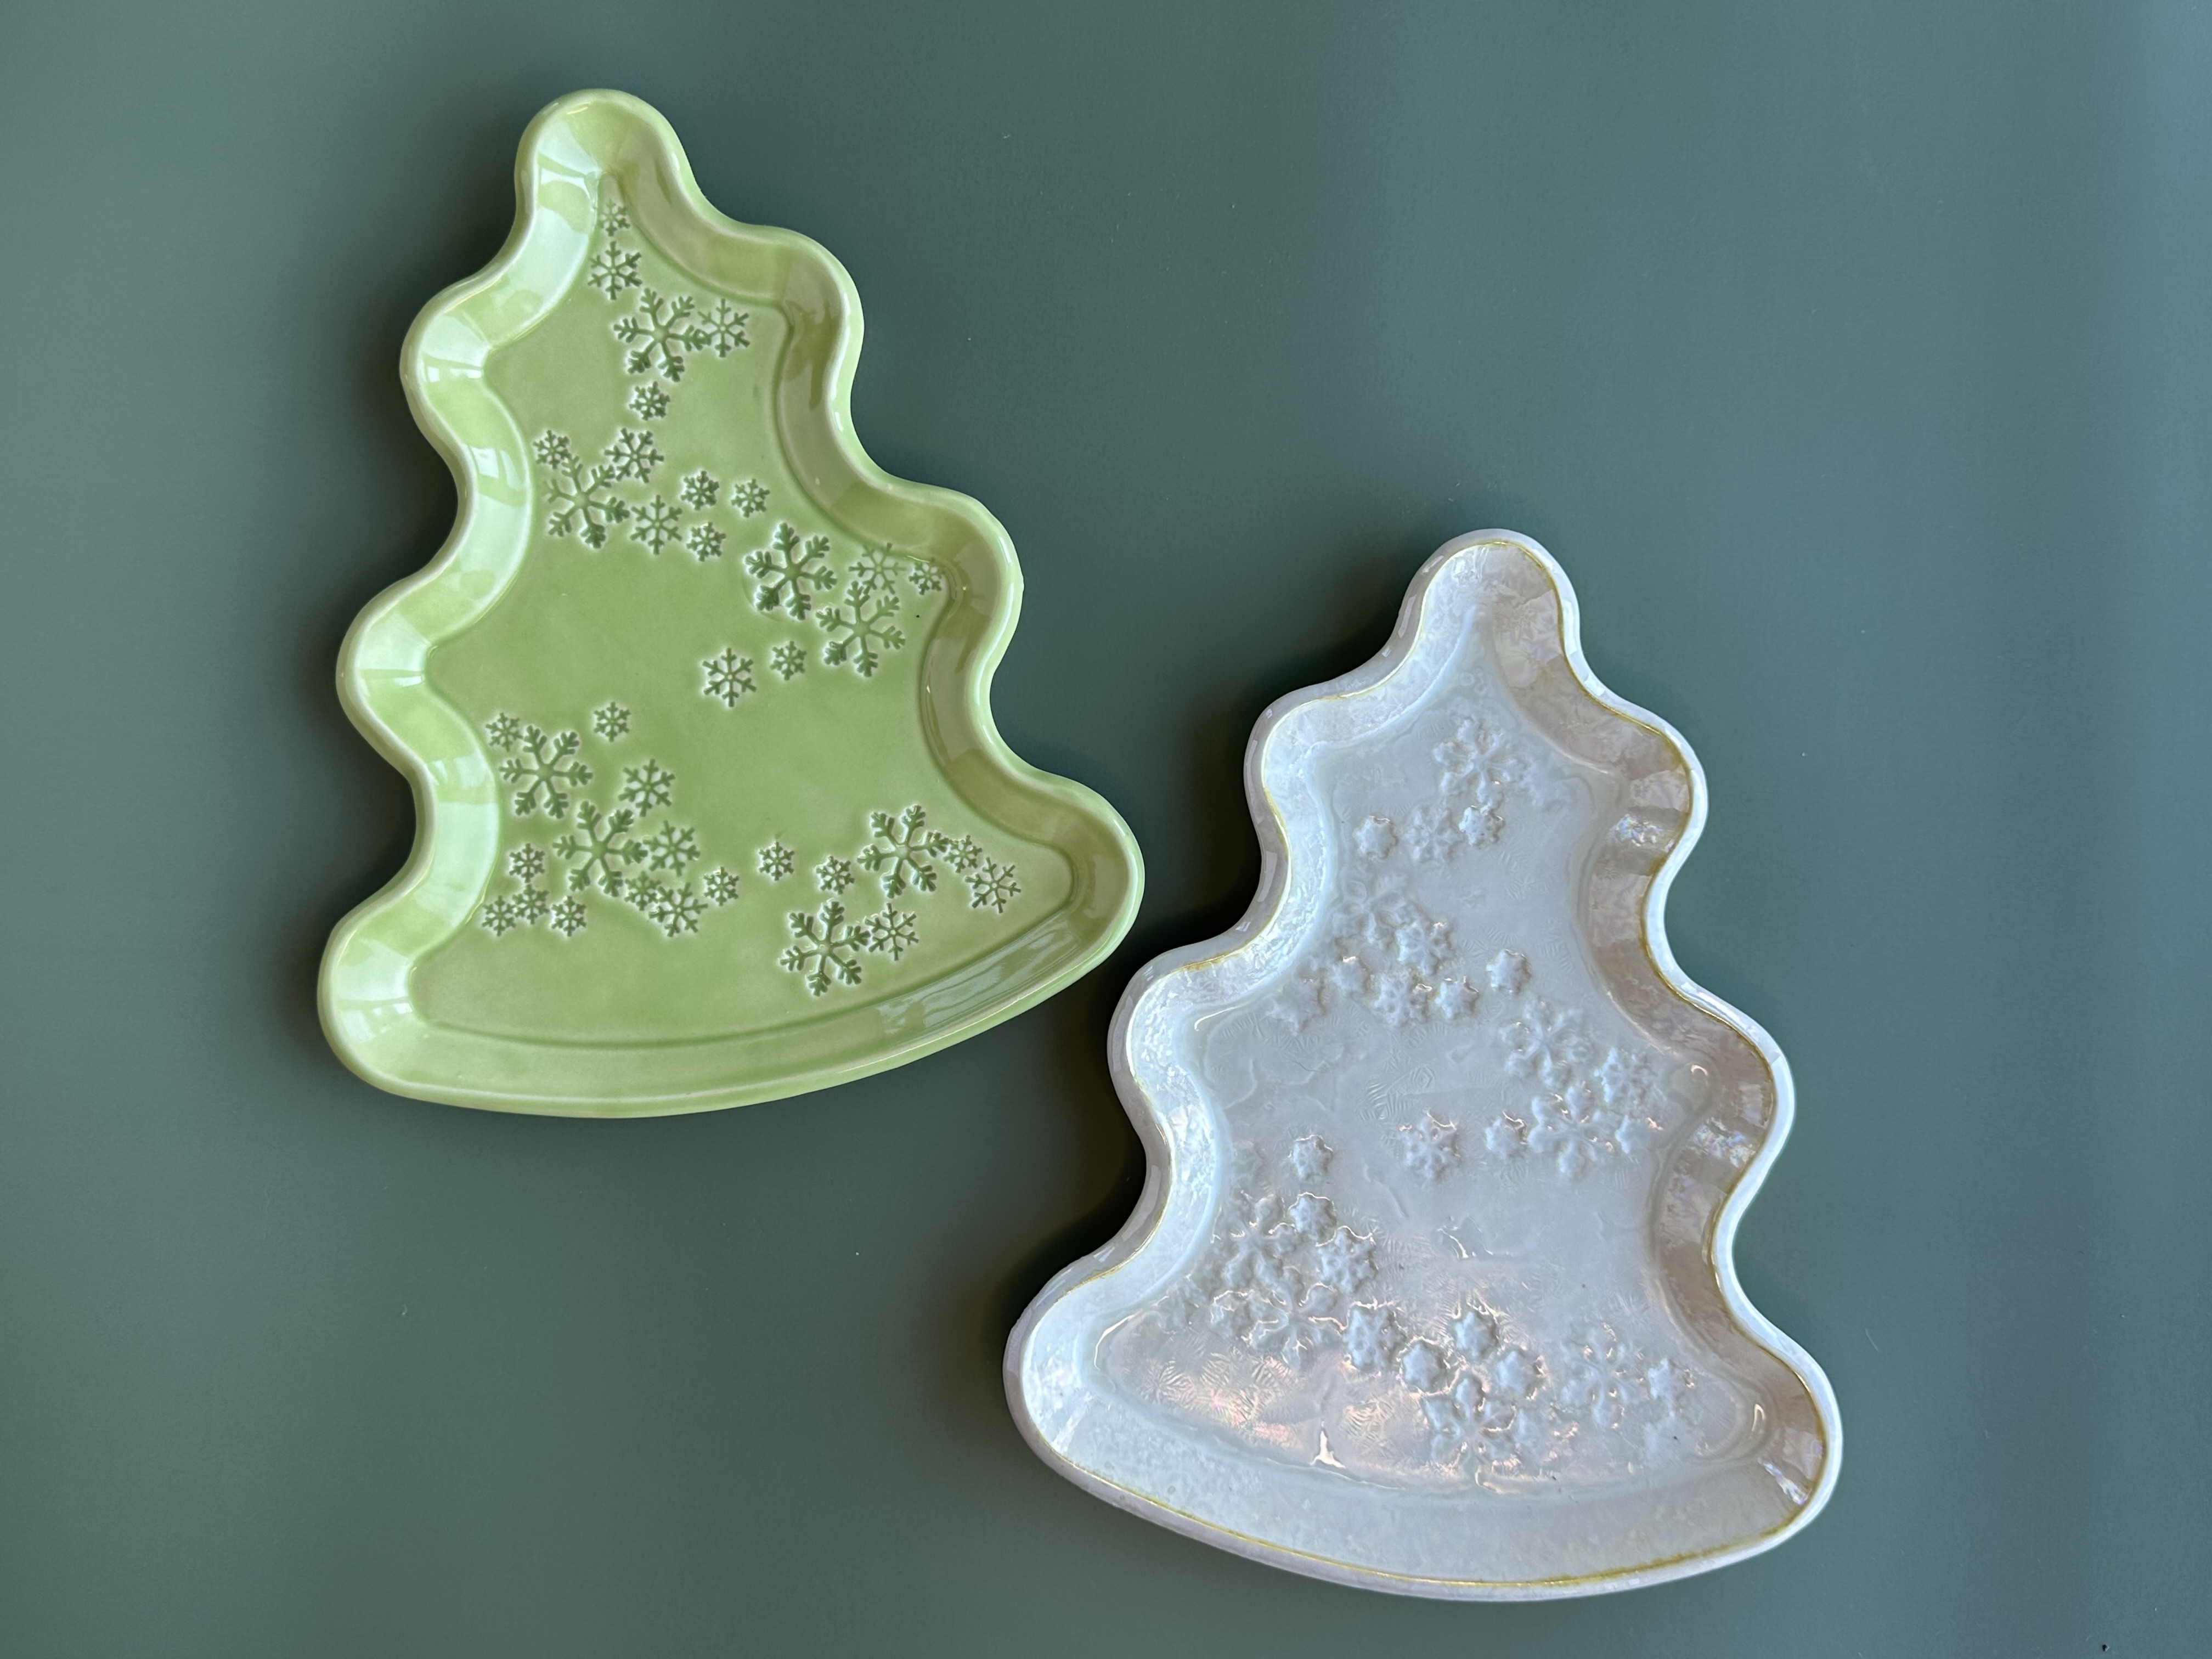 Make a Holiday Tree Plate Using GR Forms and AMACO Glazes